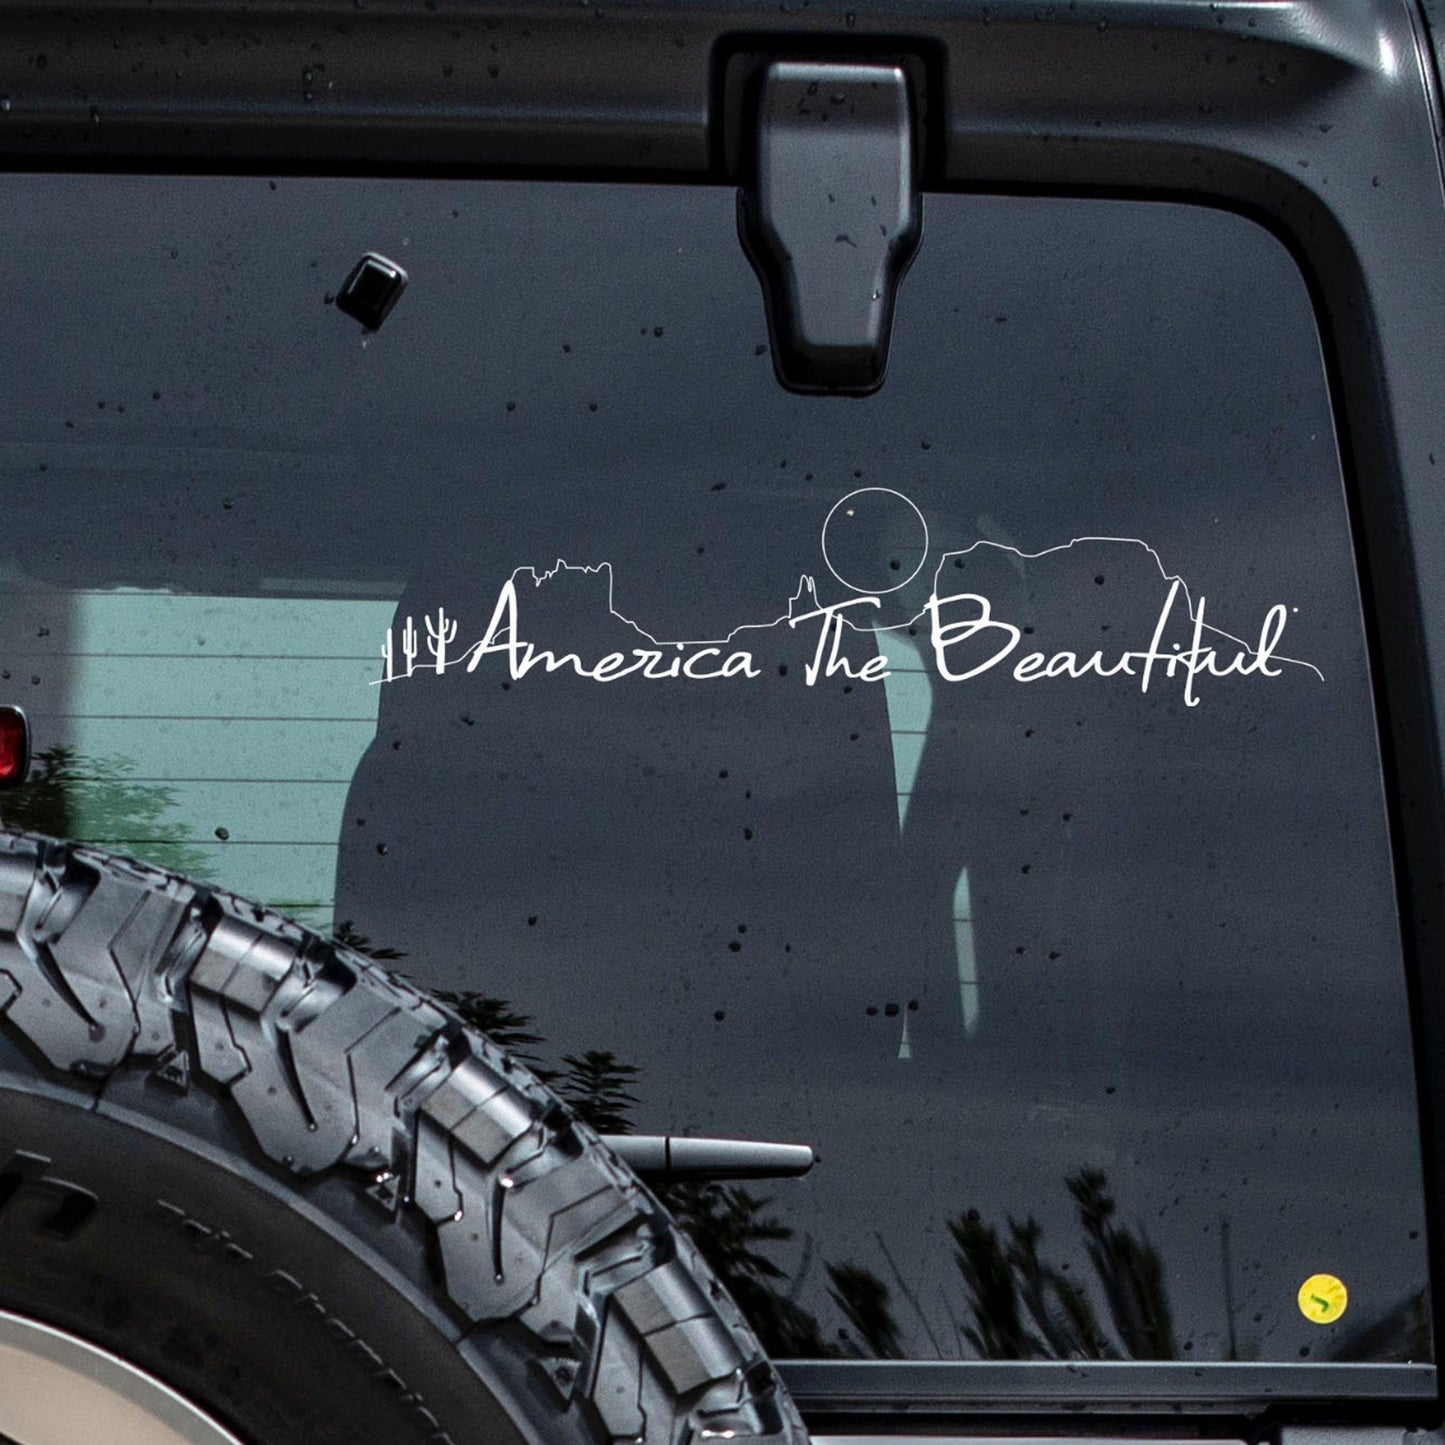 The American West Die Cut White Vinyl Sticker Decal by America The Beautiful®